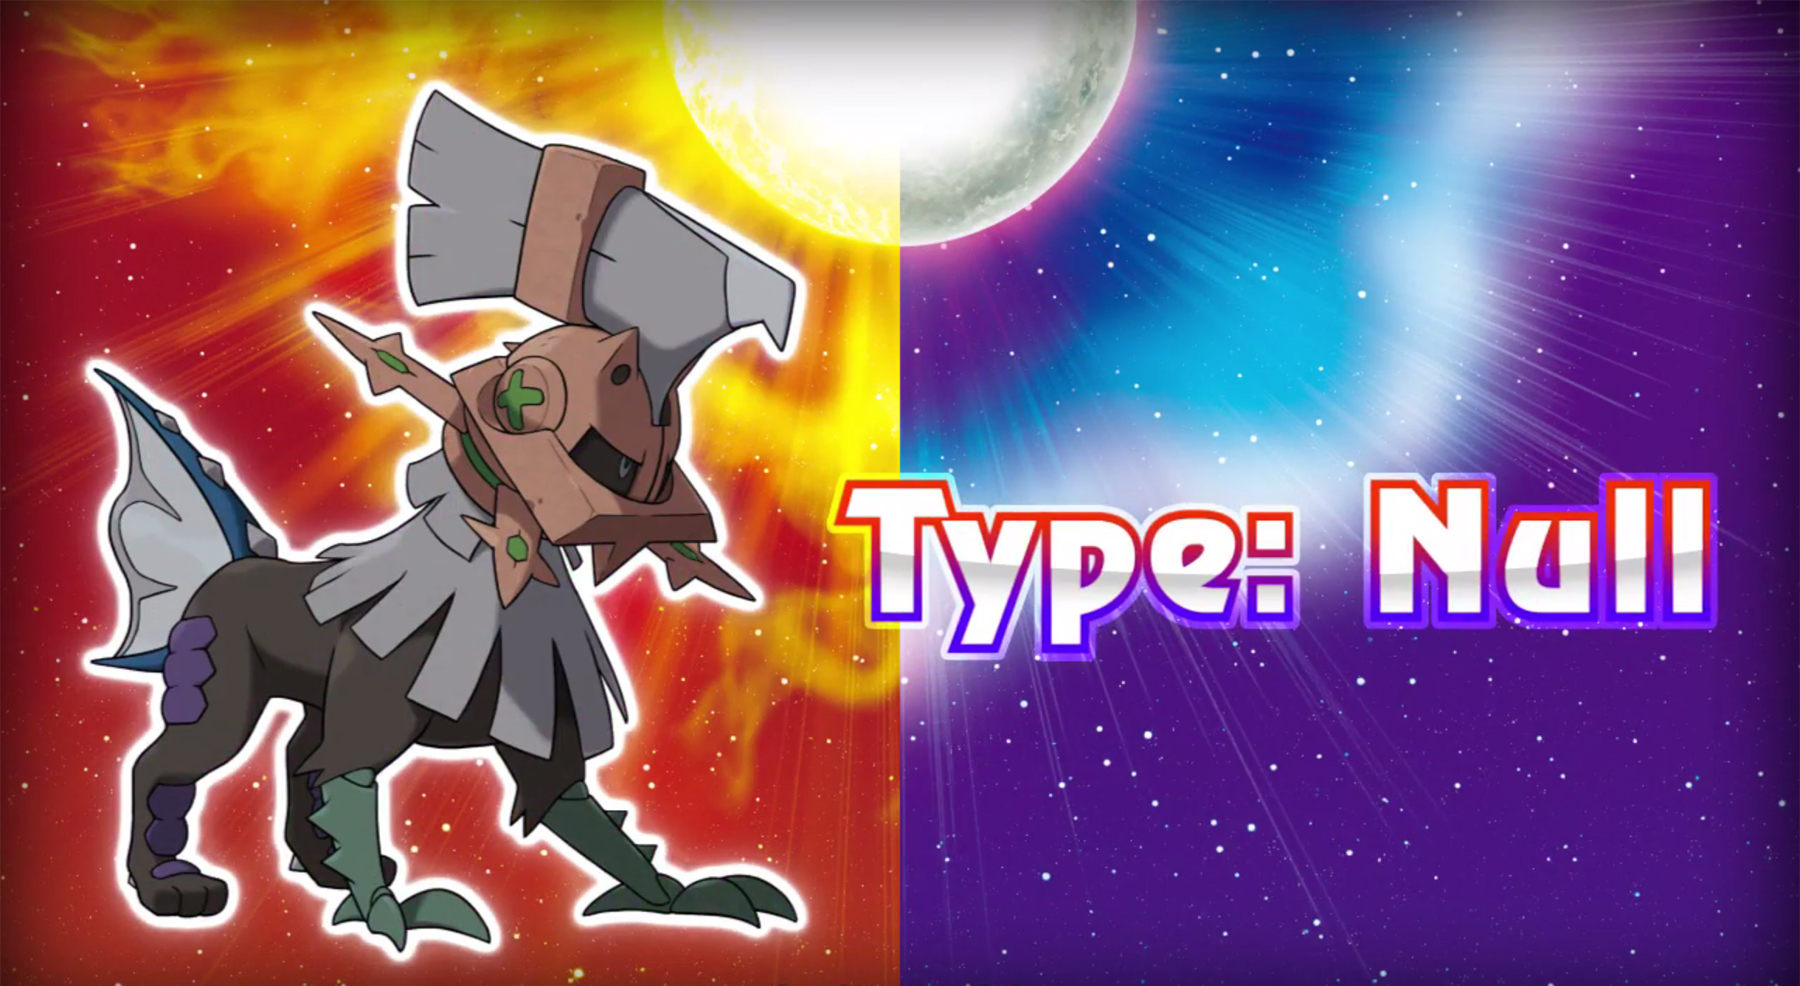 Pokemon Sun and Moon: Ultra Beasts, Aether Foundation Revealed